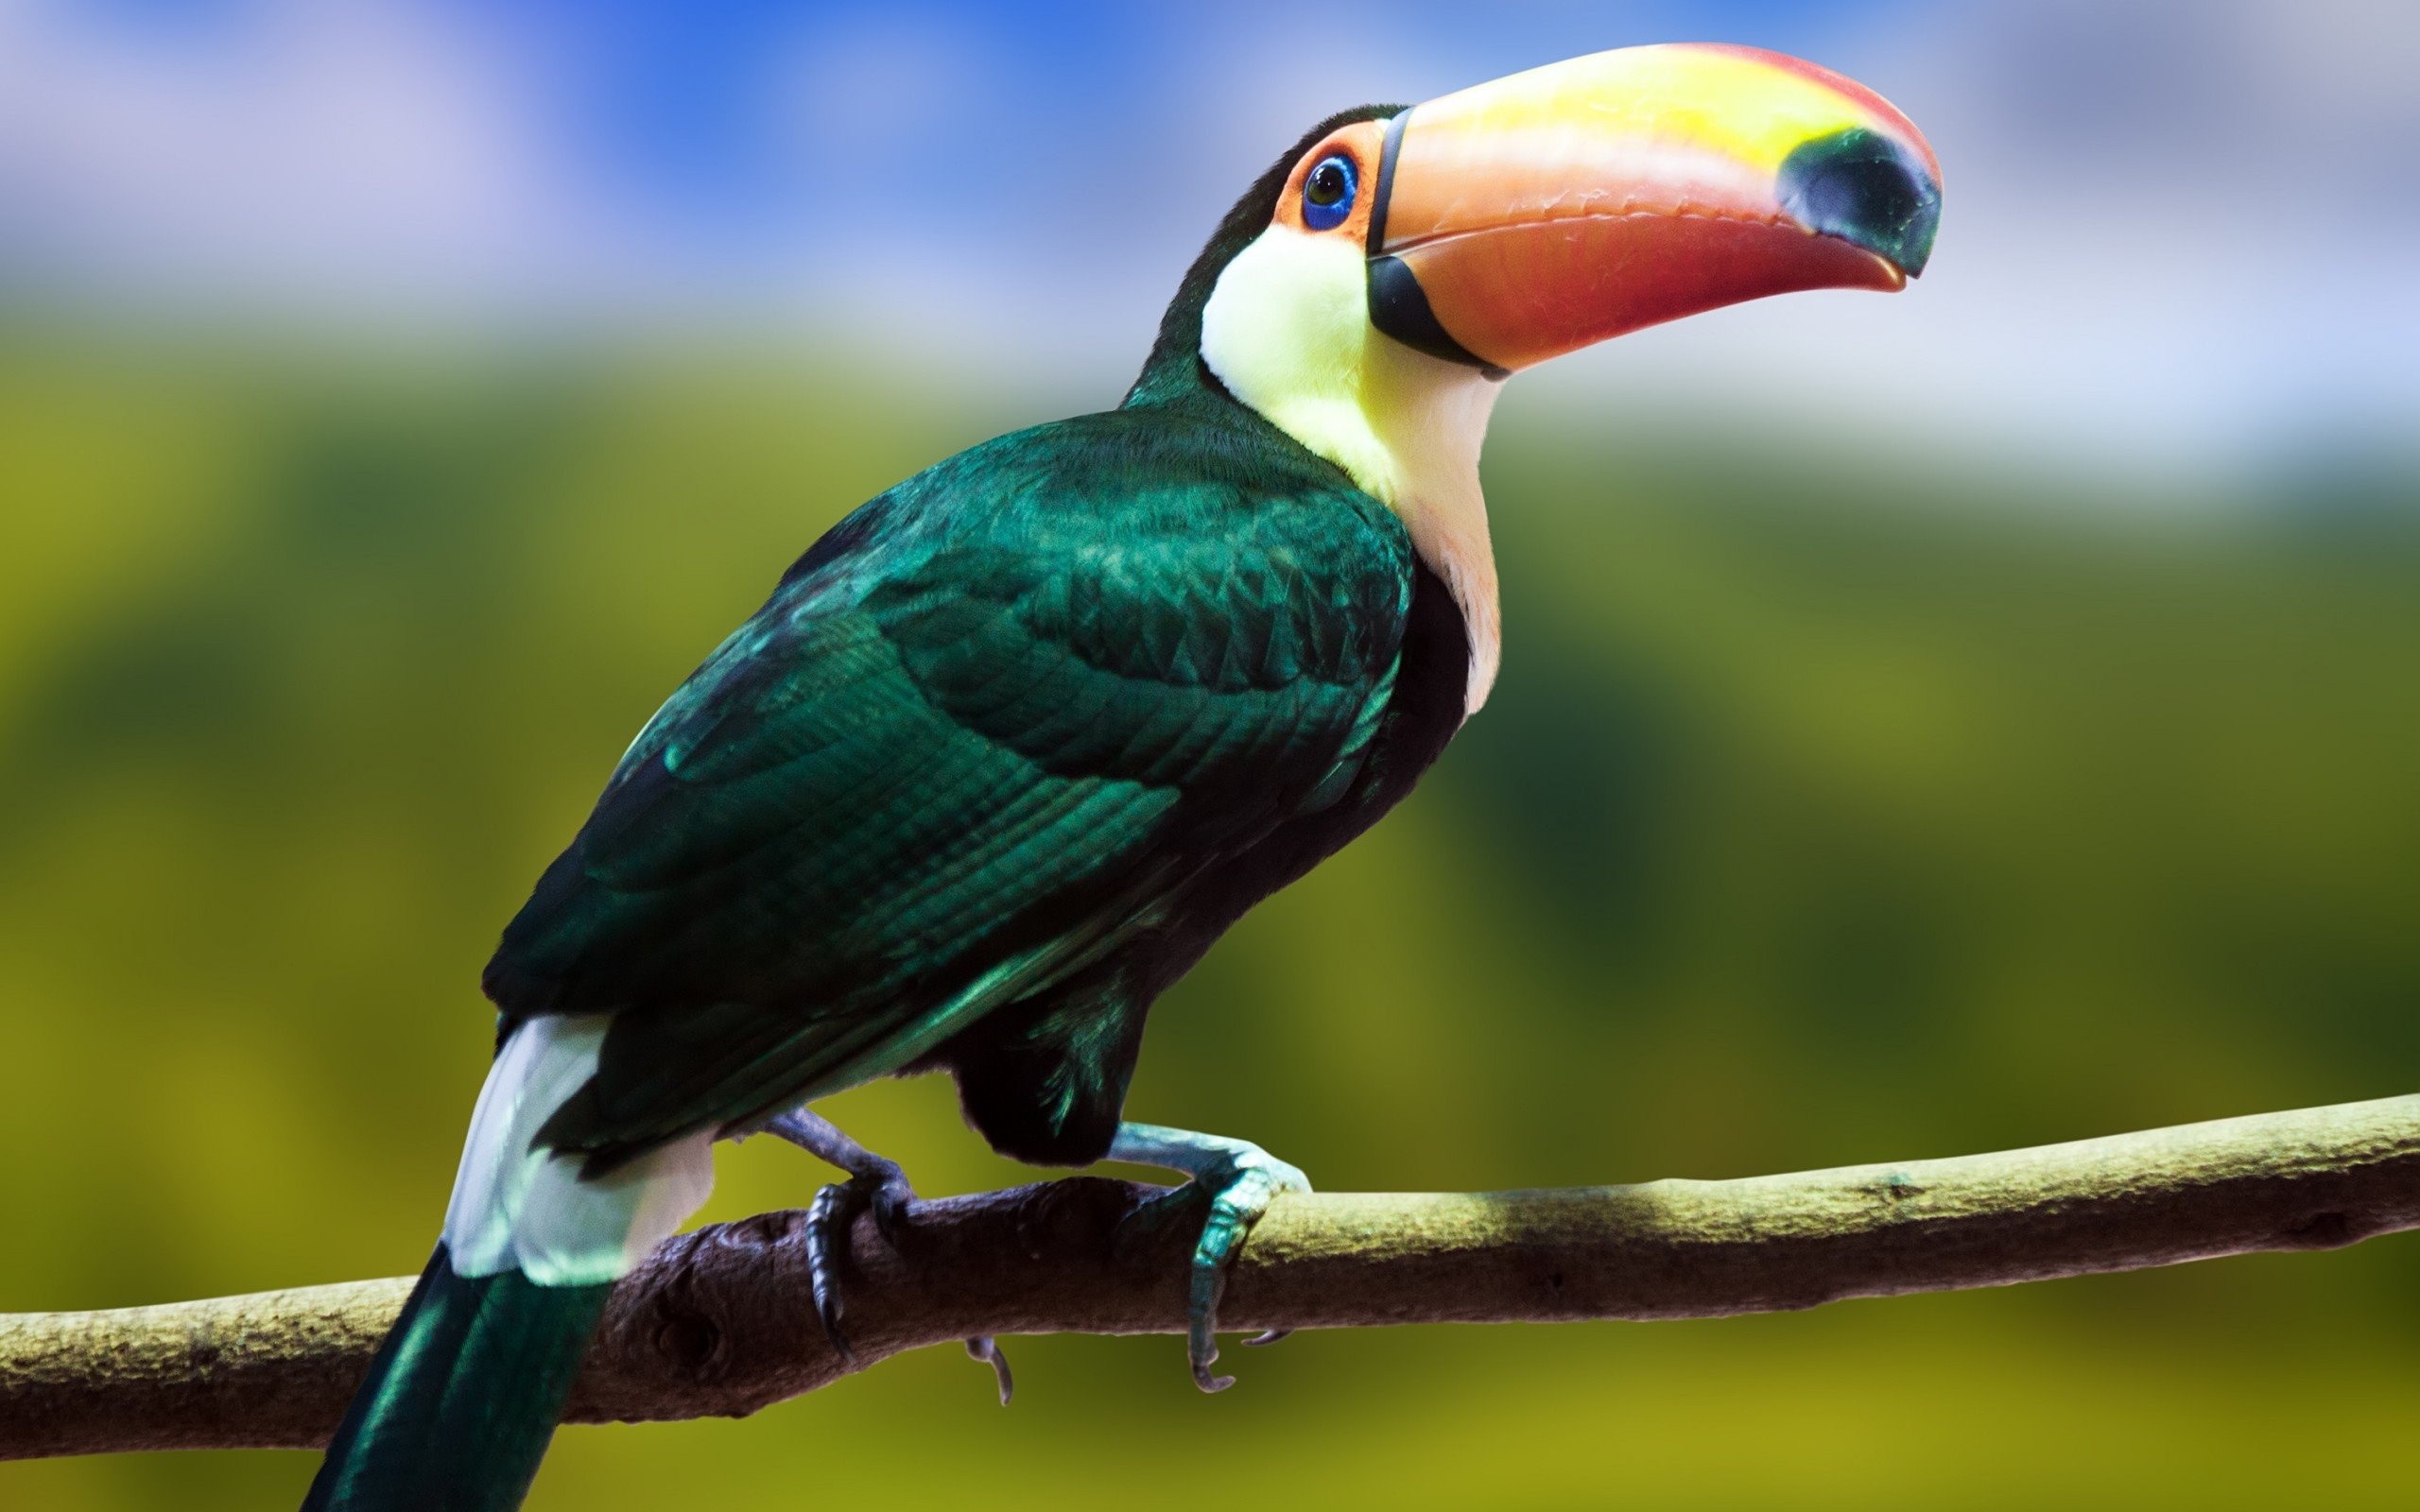 Toucan, Toucan wallpapers HD, Free image download, High definition backgrounds, 2560x1600 HD Desktop